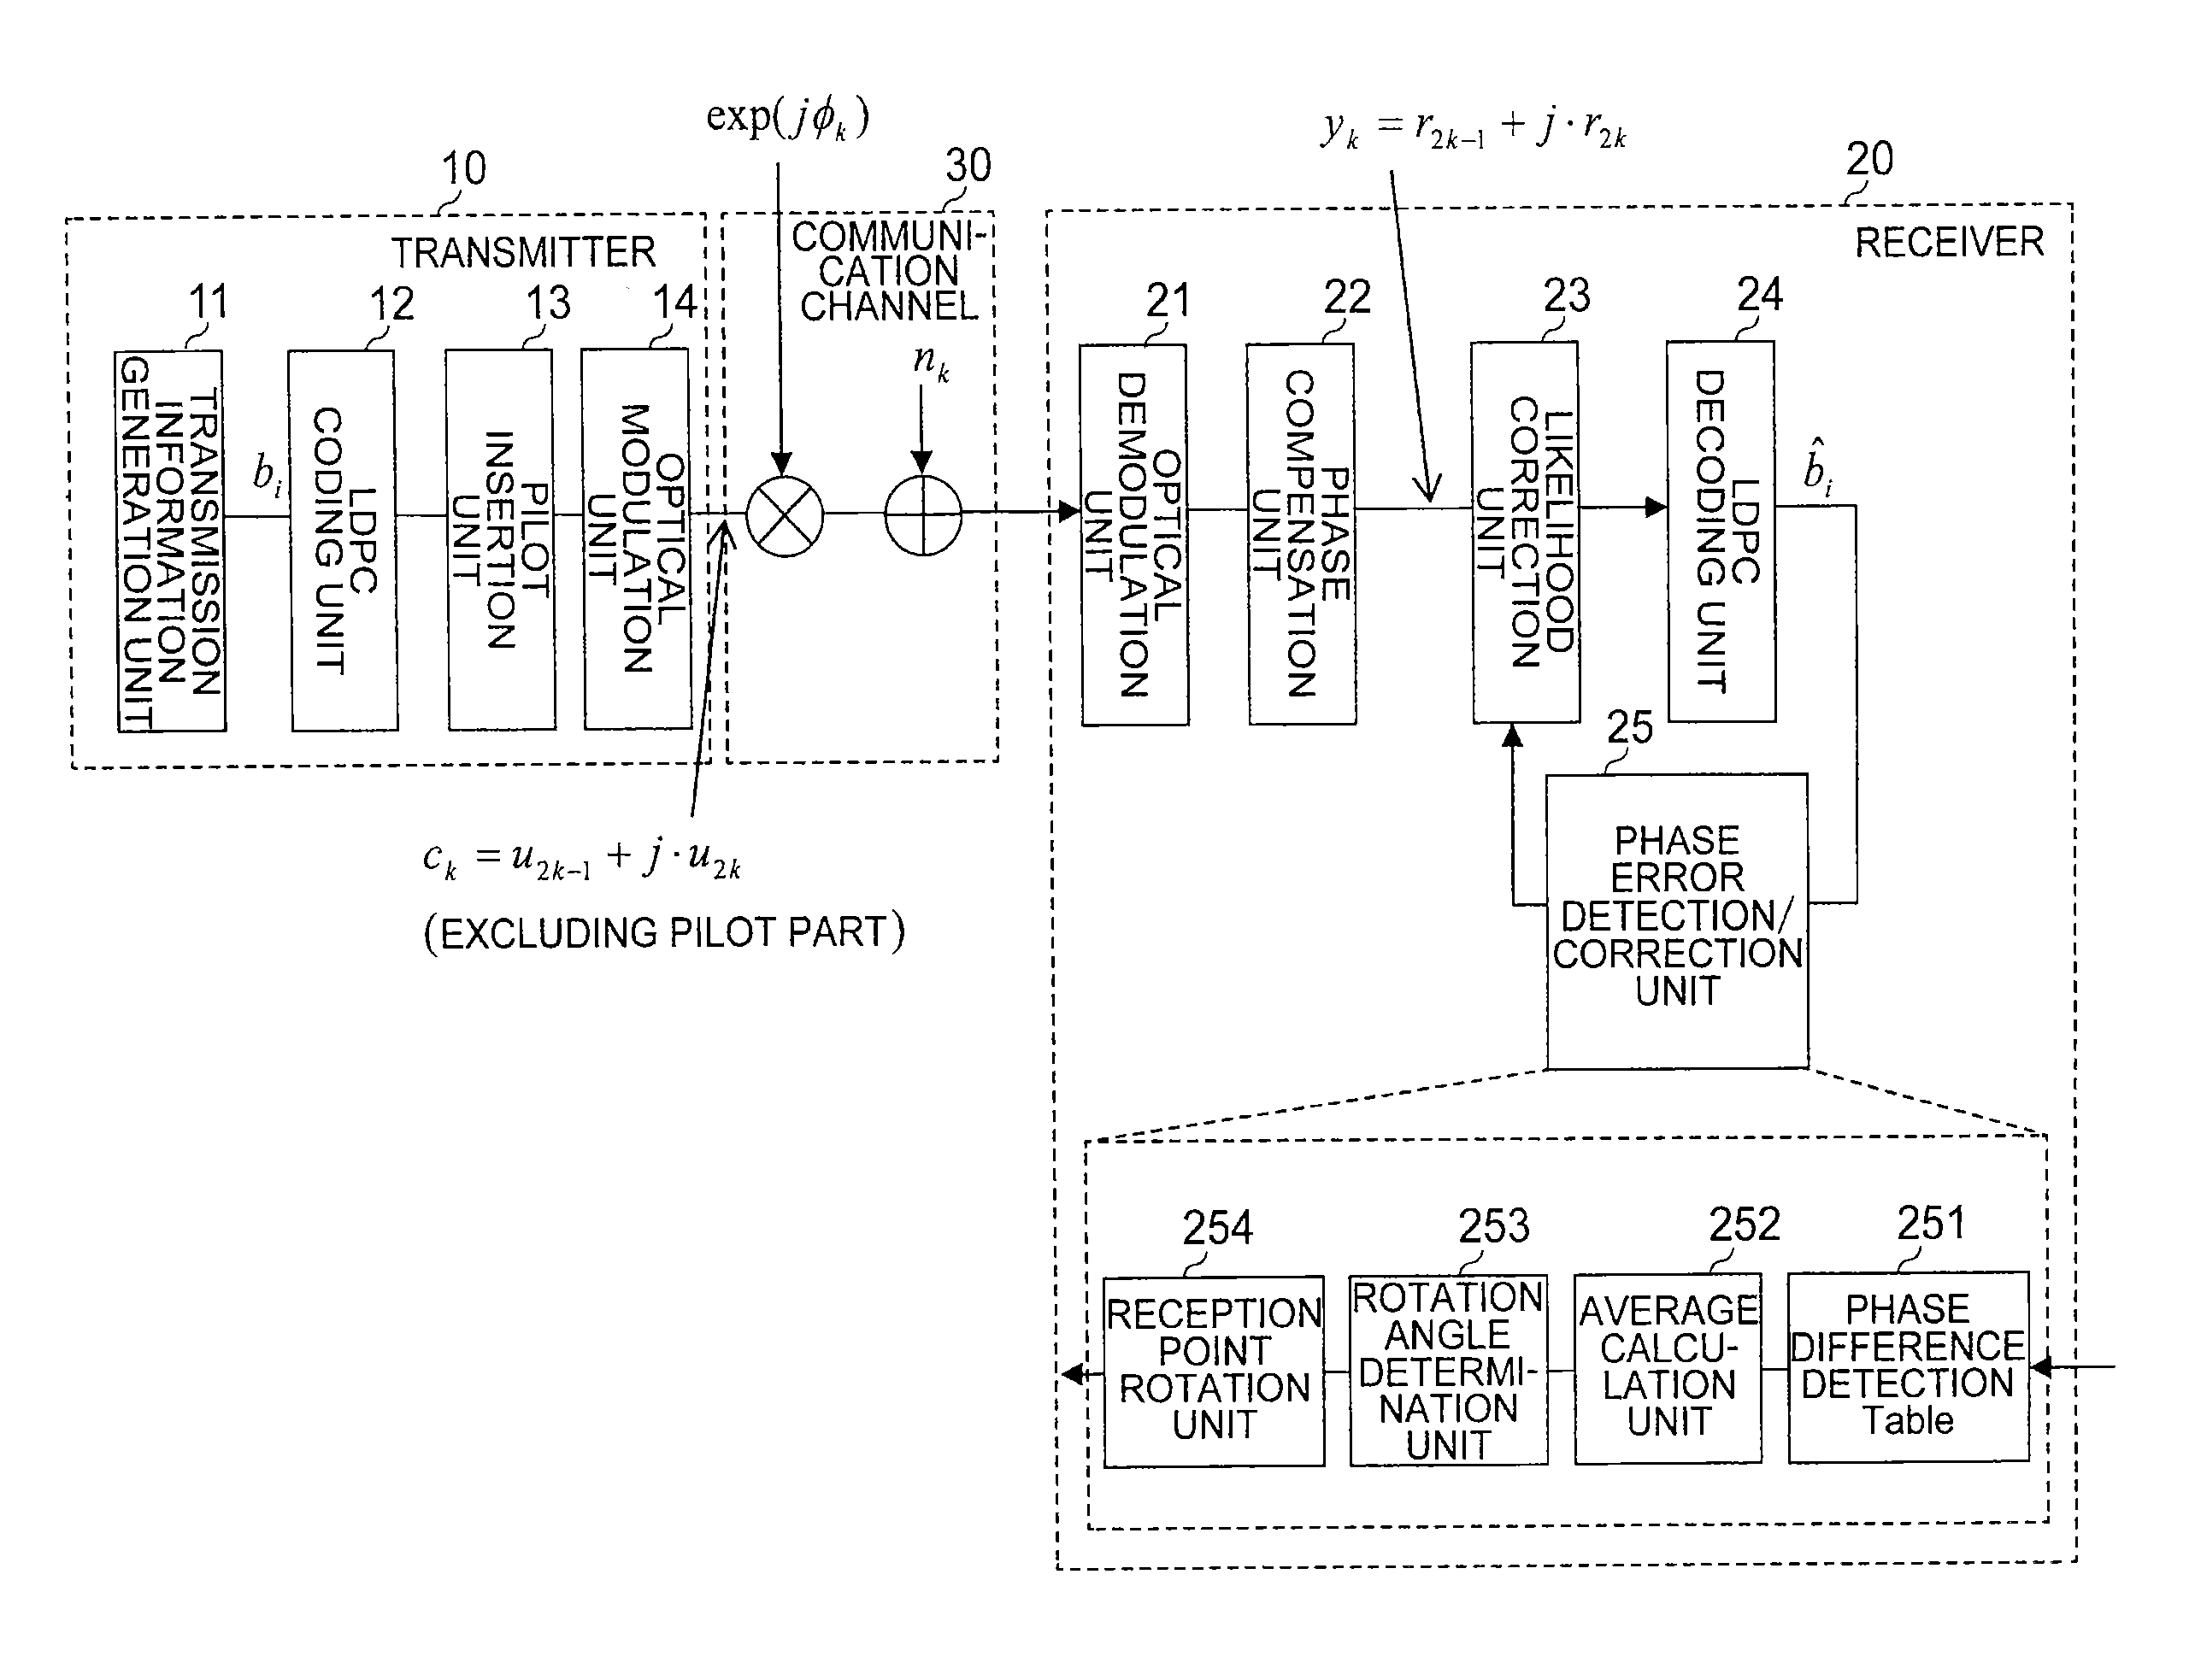 Receiver, transmitter, and communication method